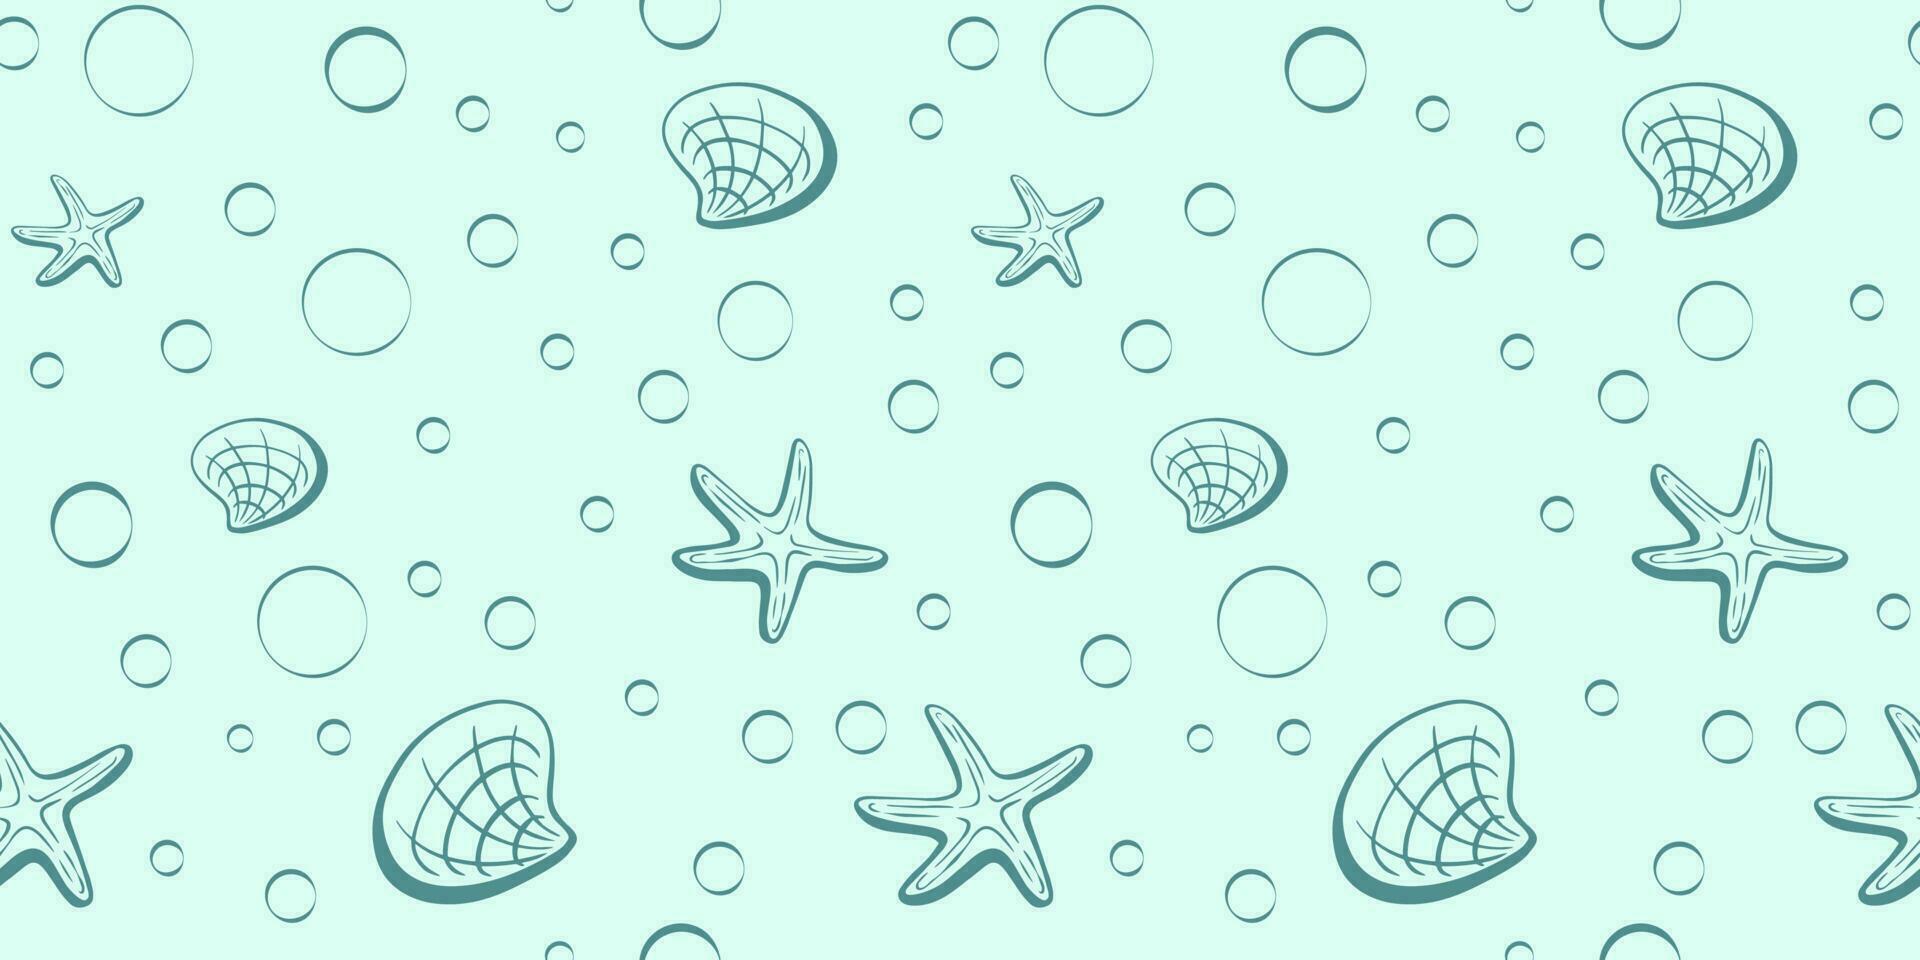 Seamless pattern with shells. Vector illustration. Sea clums seamless pattern. Tropical underwater world.